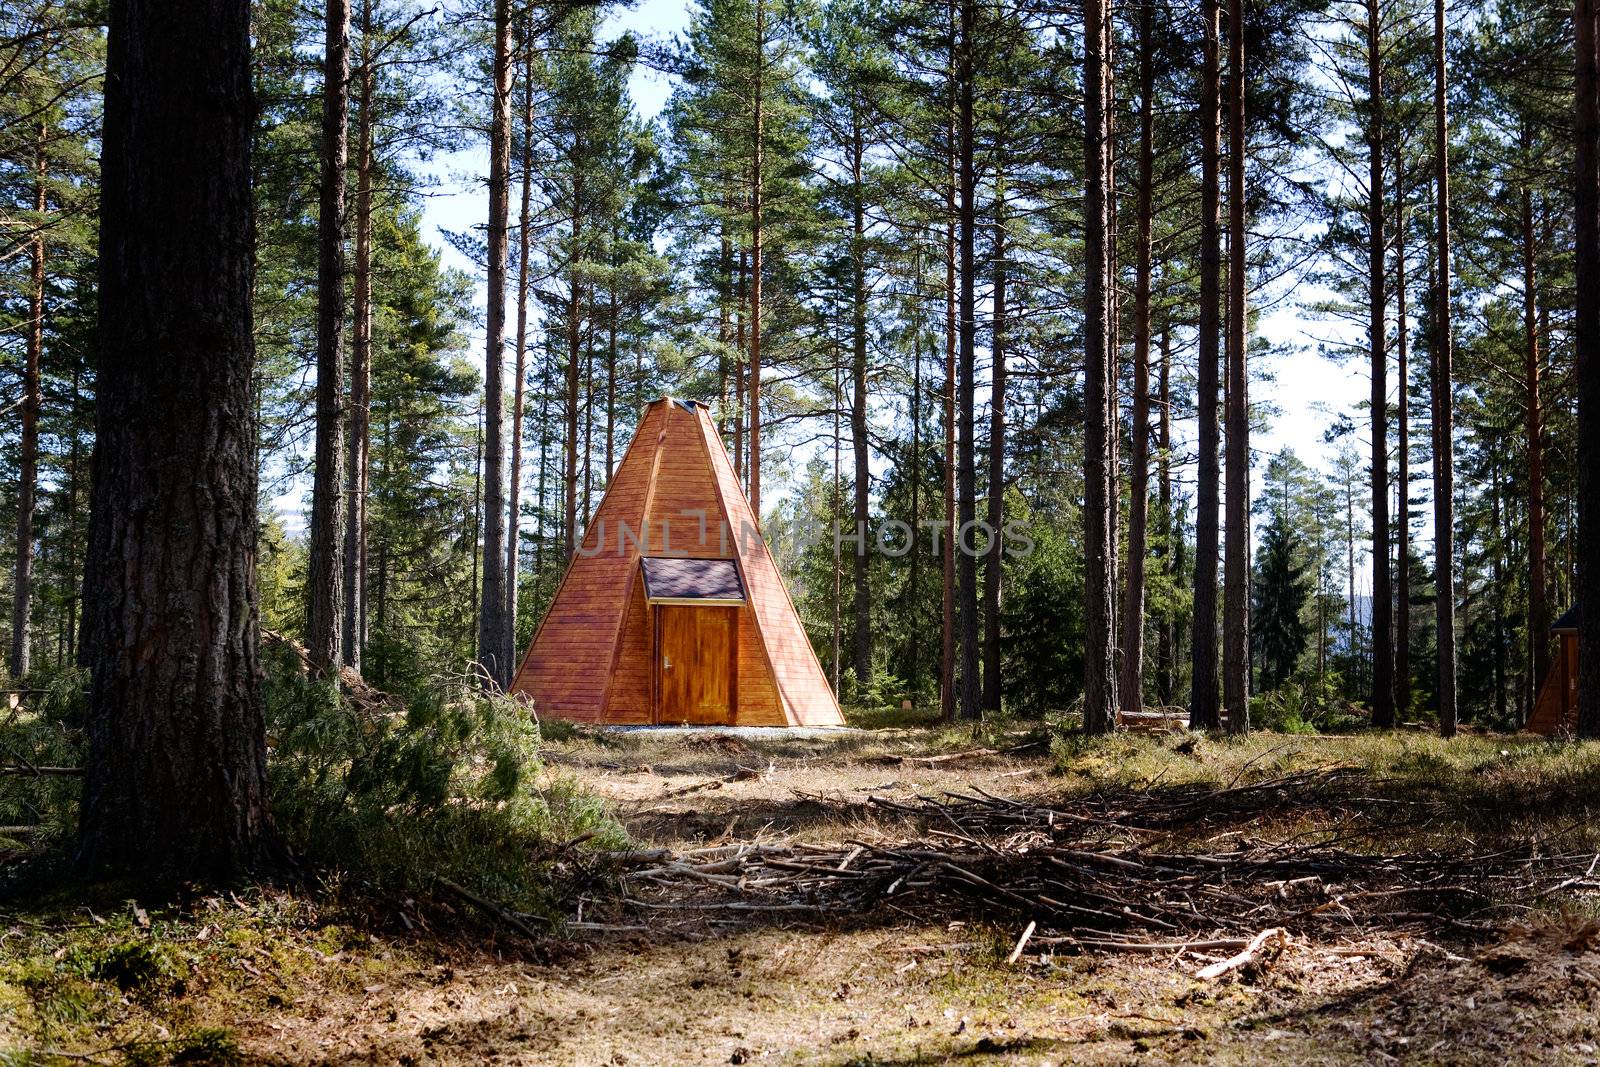 A teepee cabin hut in the forest